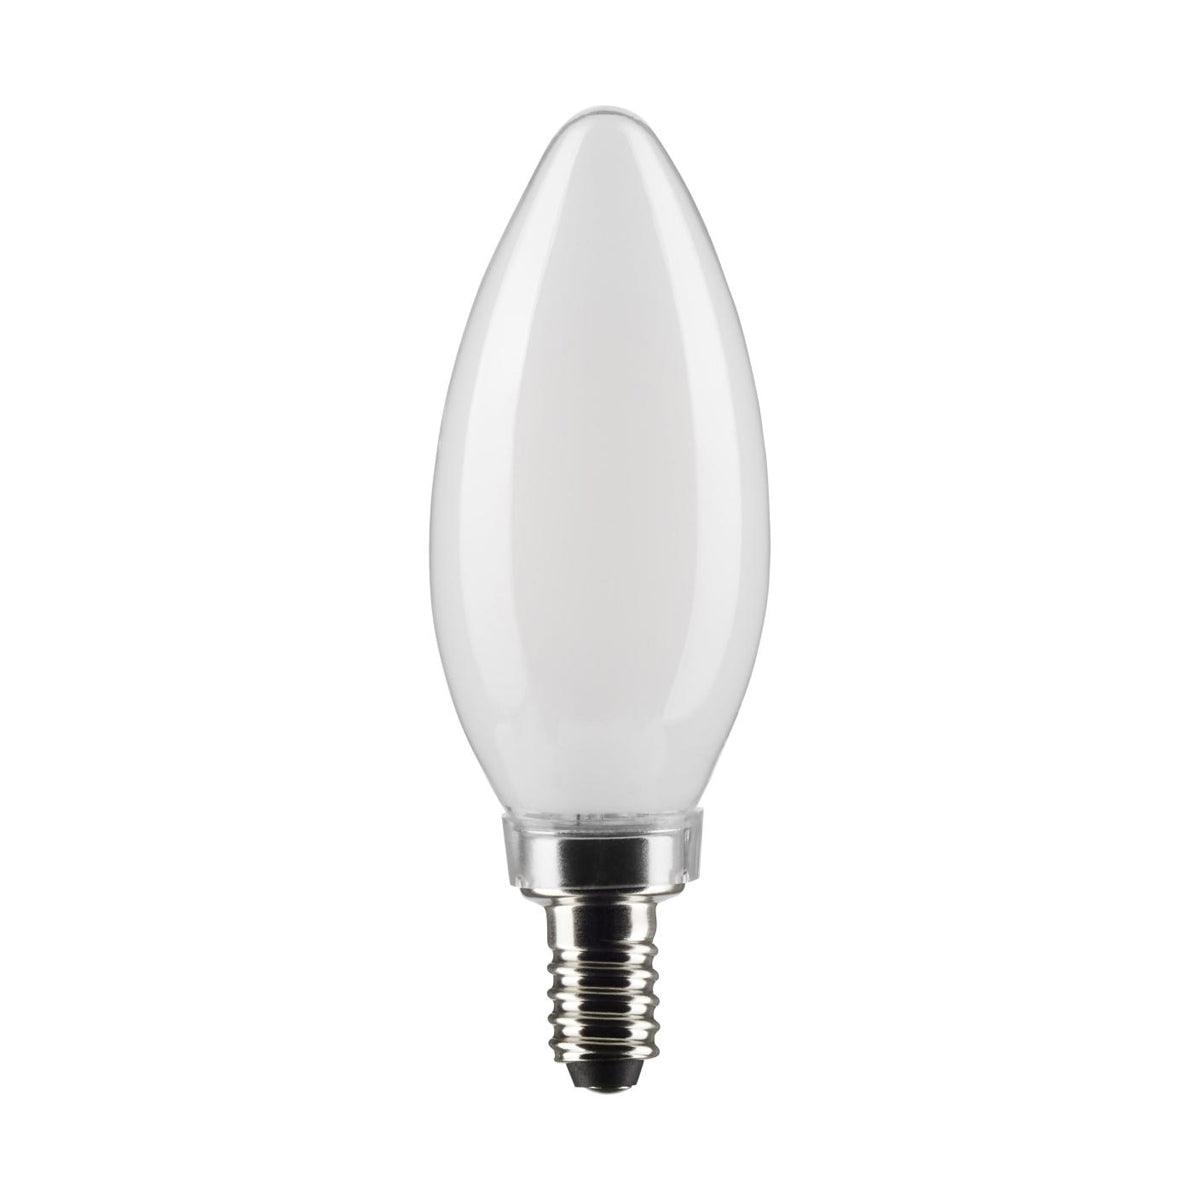 B11 Candle LED Bulb, 60W Equivalent,6 Watt, 500 Lumens, 5000K, E12 Candelabra Base, Frosted Finish, Pack Of 2 - Bees Lighting